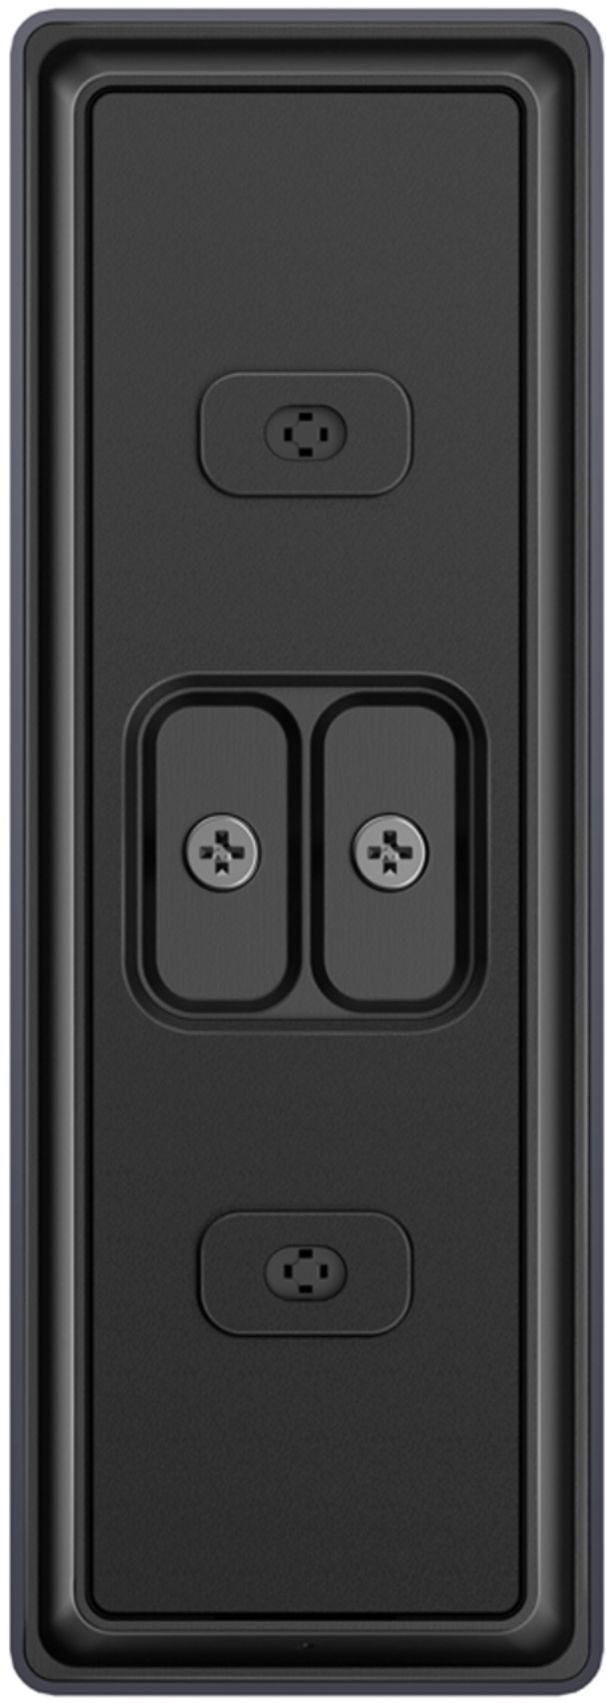 Left View: eufy Security - Smart Wi-Fi Video Doorbell 2K Pro Wired - Black/White